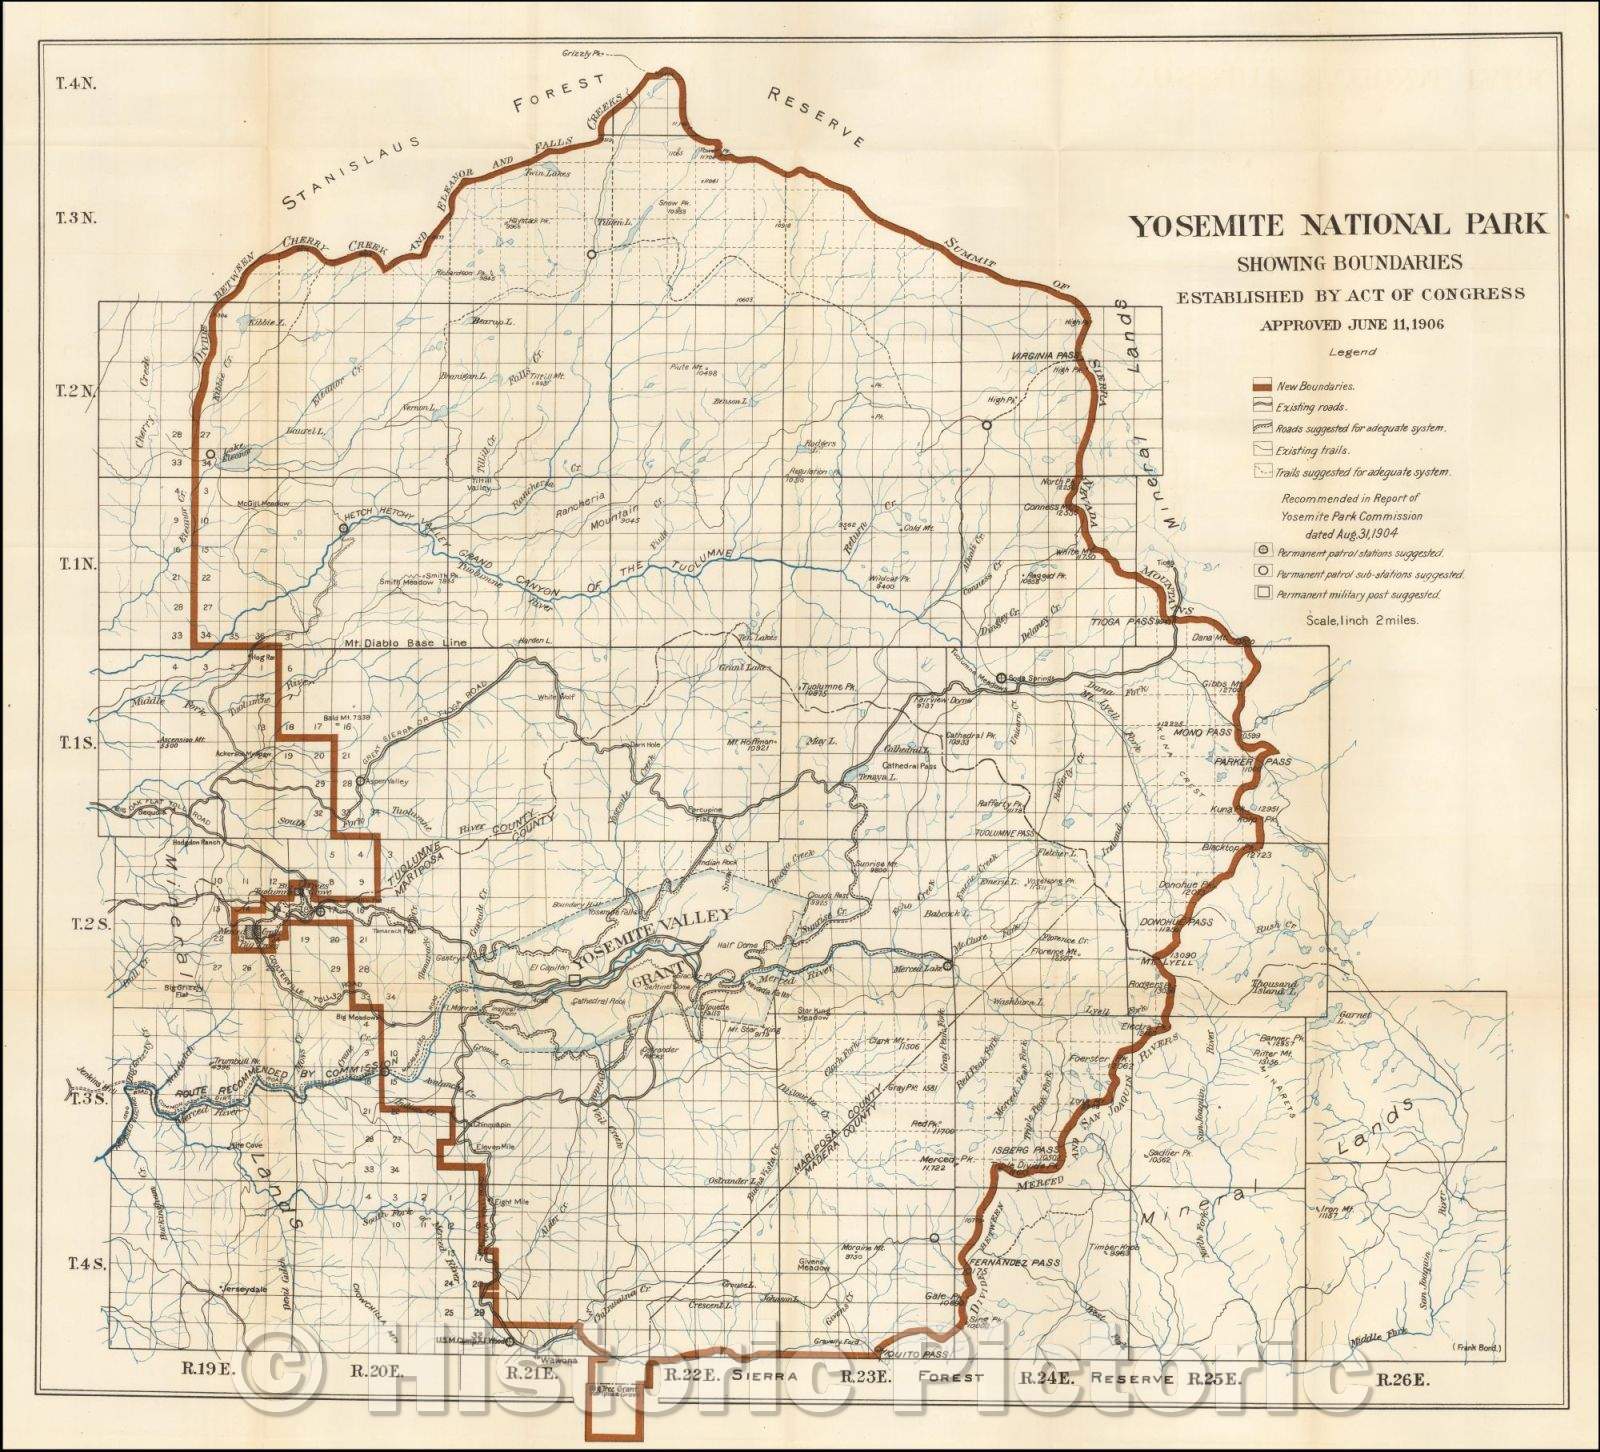 Historic Map - Yosemite National Park Showing Boundaries Established, 1906, United States Department of the Interior - Vintage Wall Art